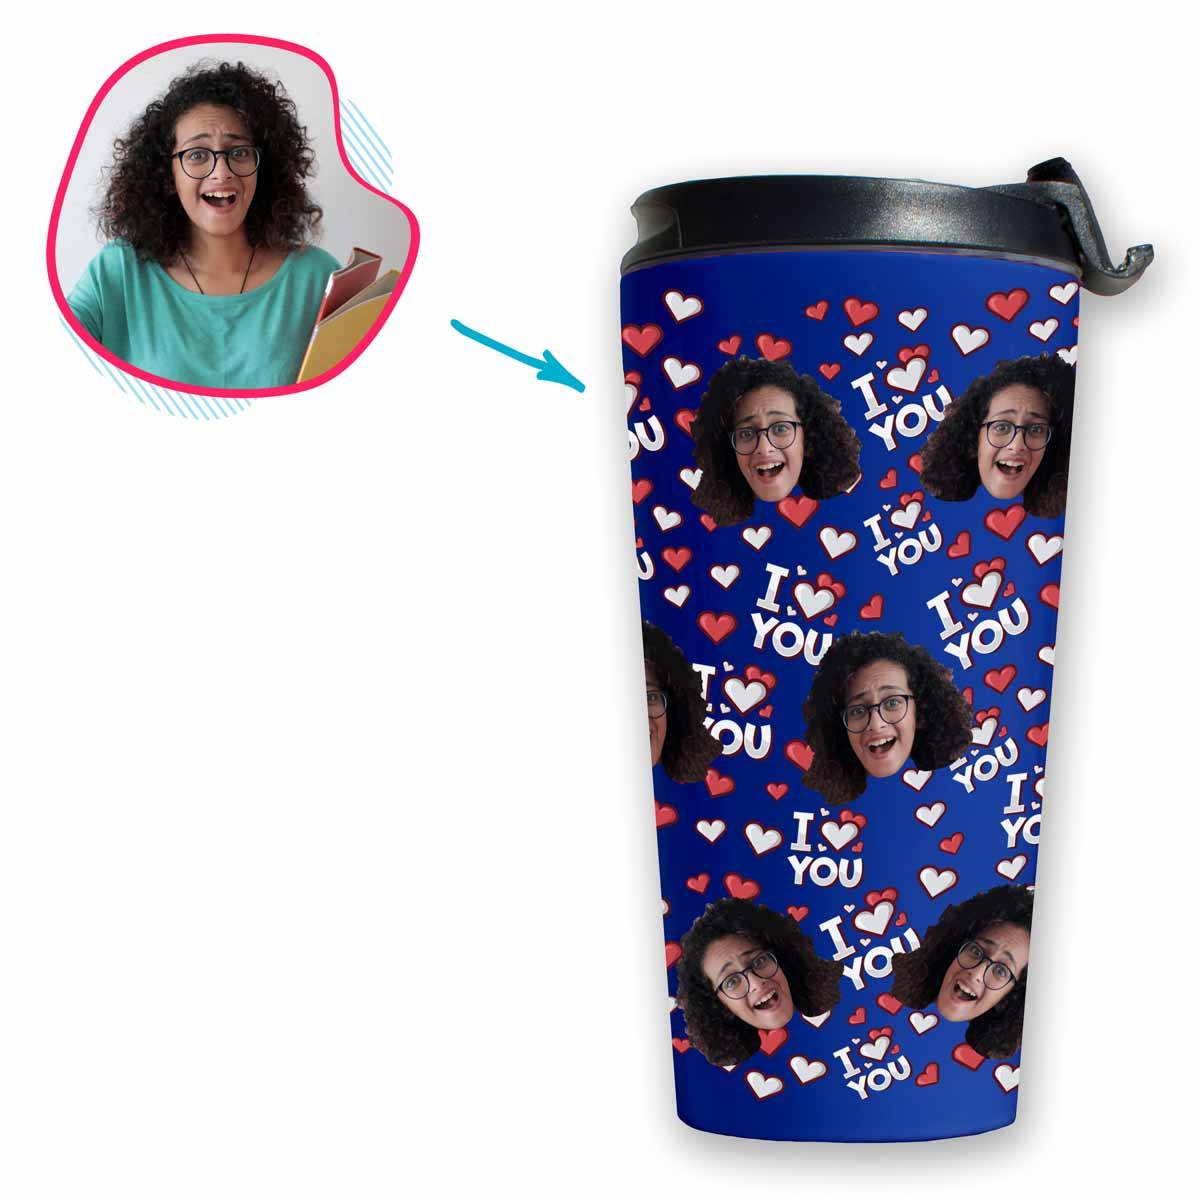 darkblue I Love You travel mug personalized with photo of face printed on it